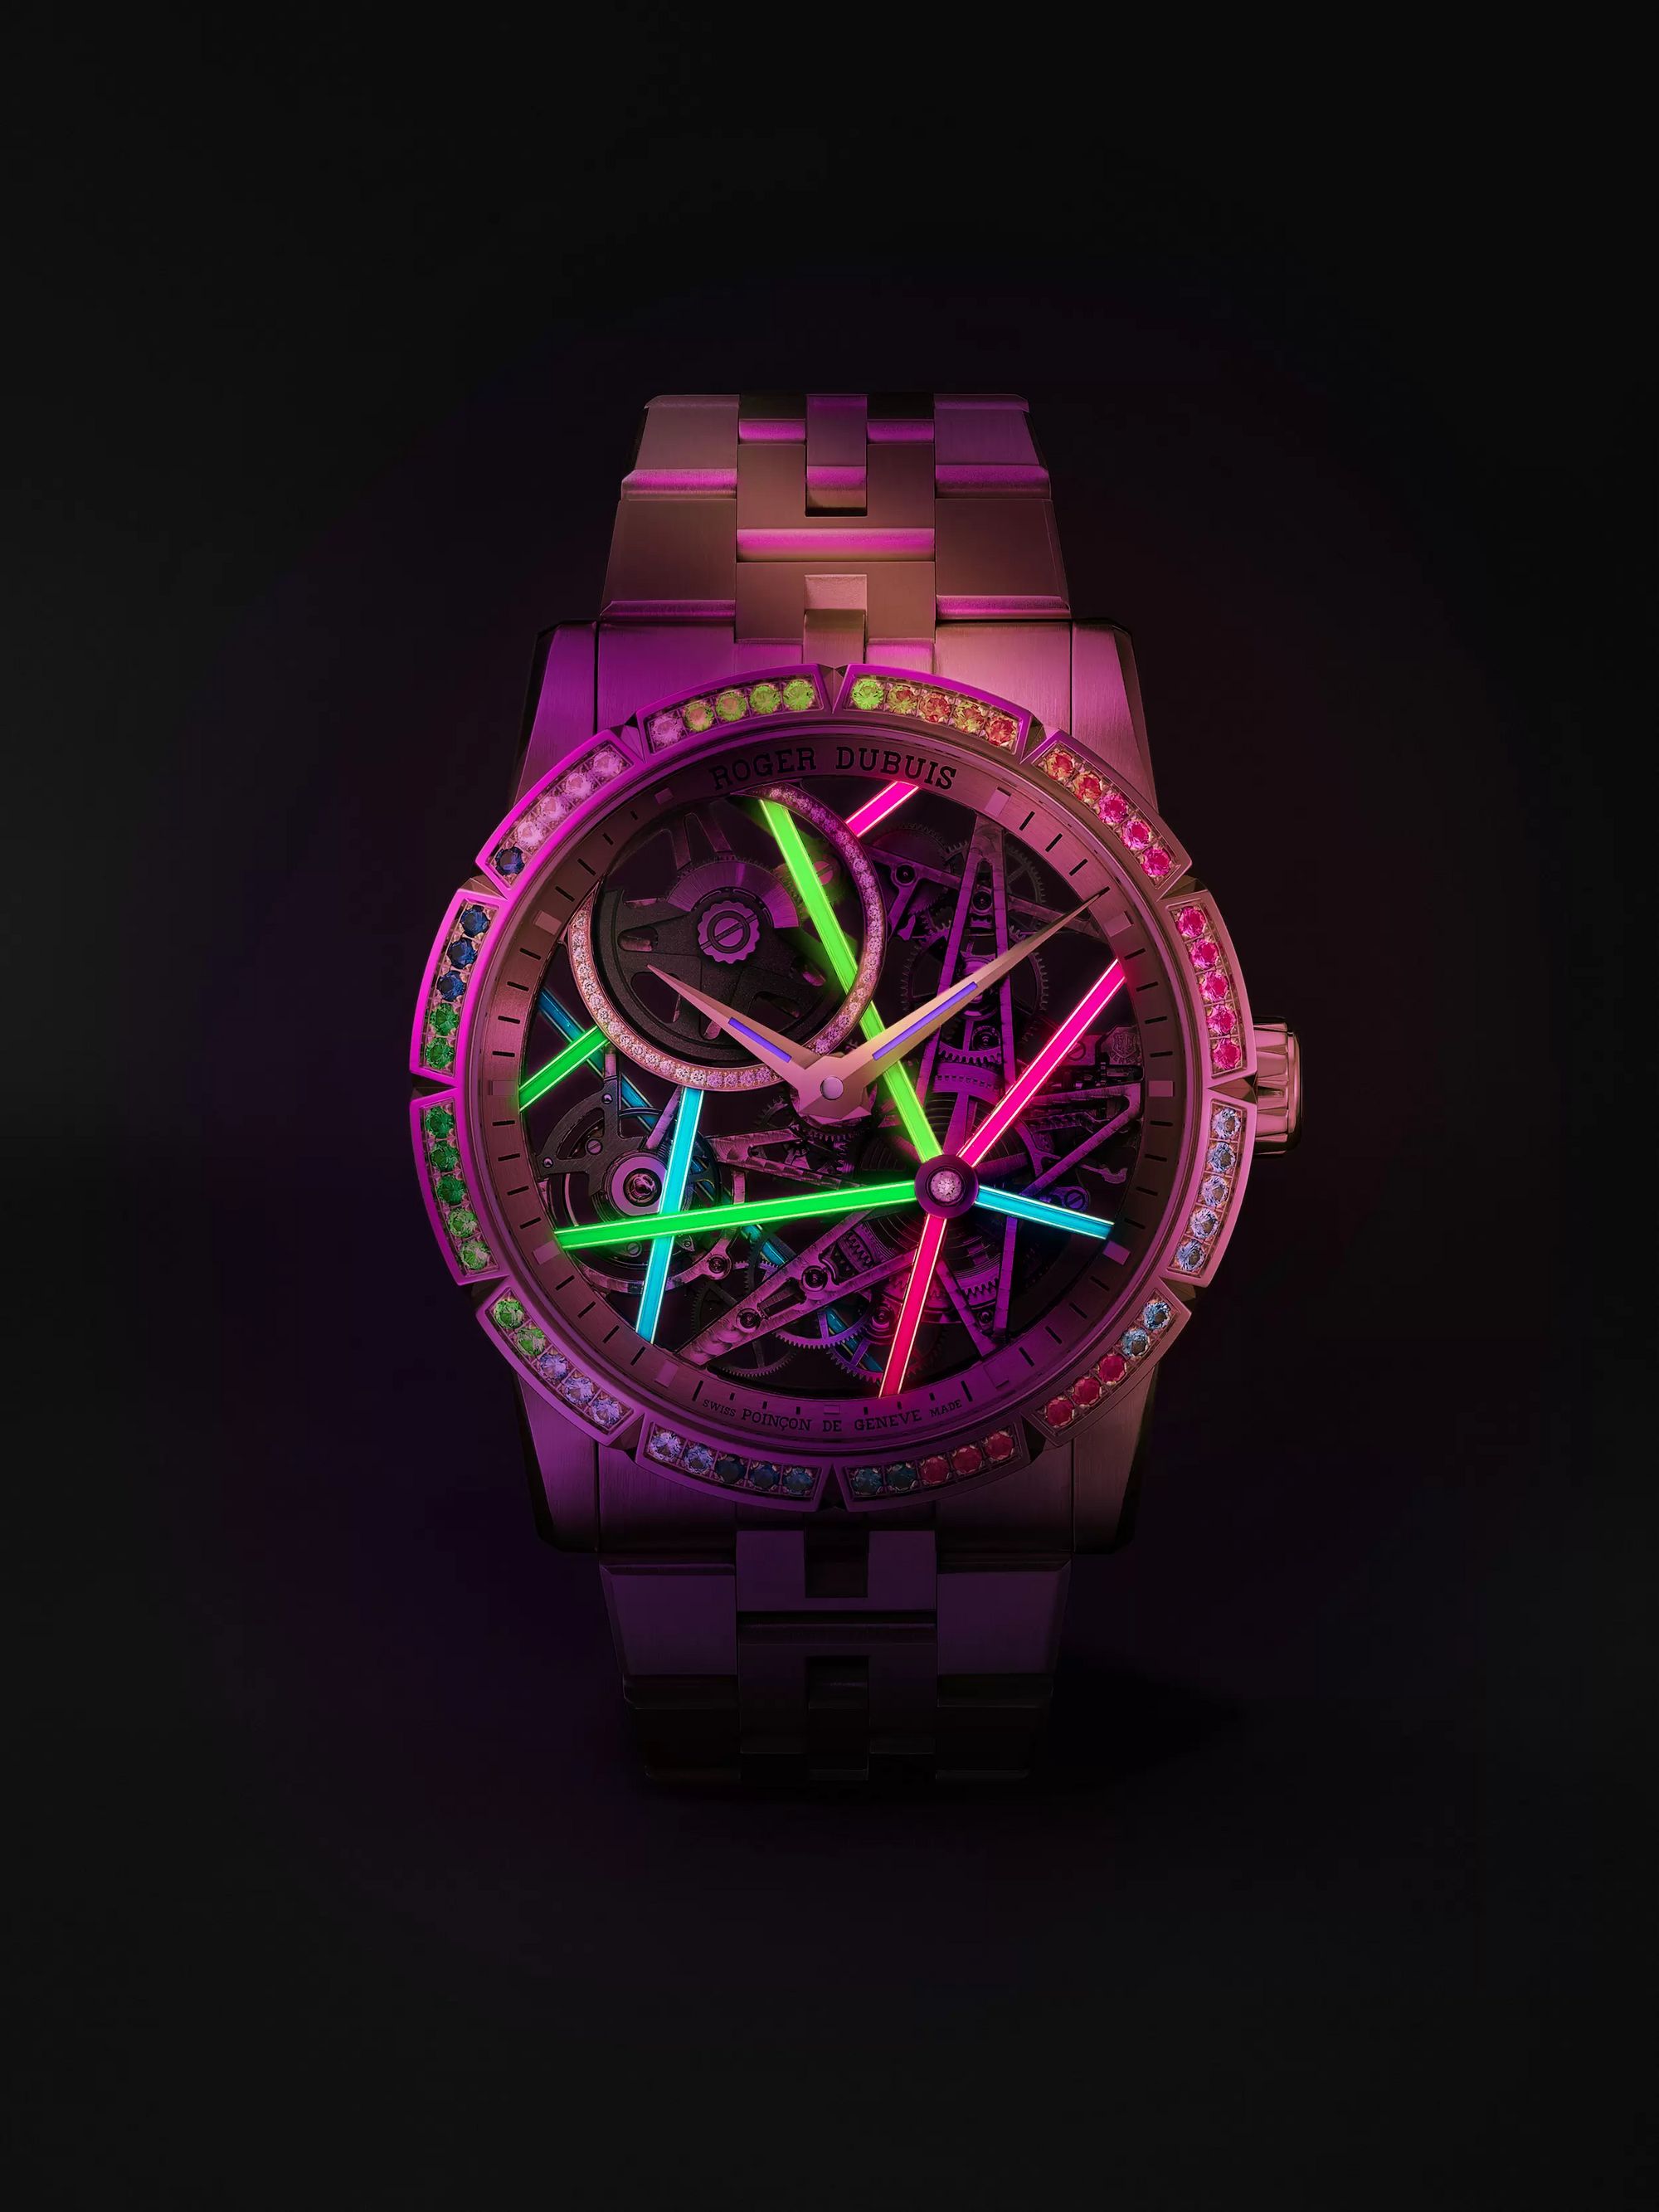 ROGER DUBUIS Excalibur Blacklight Limited Edition Automatic Skeleton 42mm 18-Karat Pink Gold and Multi-Stone Watch, Ref. No. RDDBEX0861